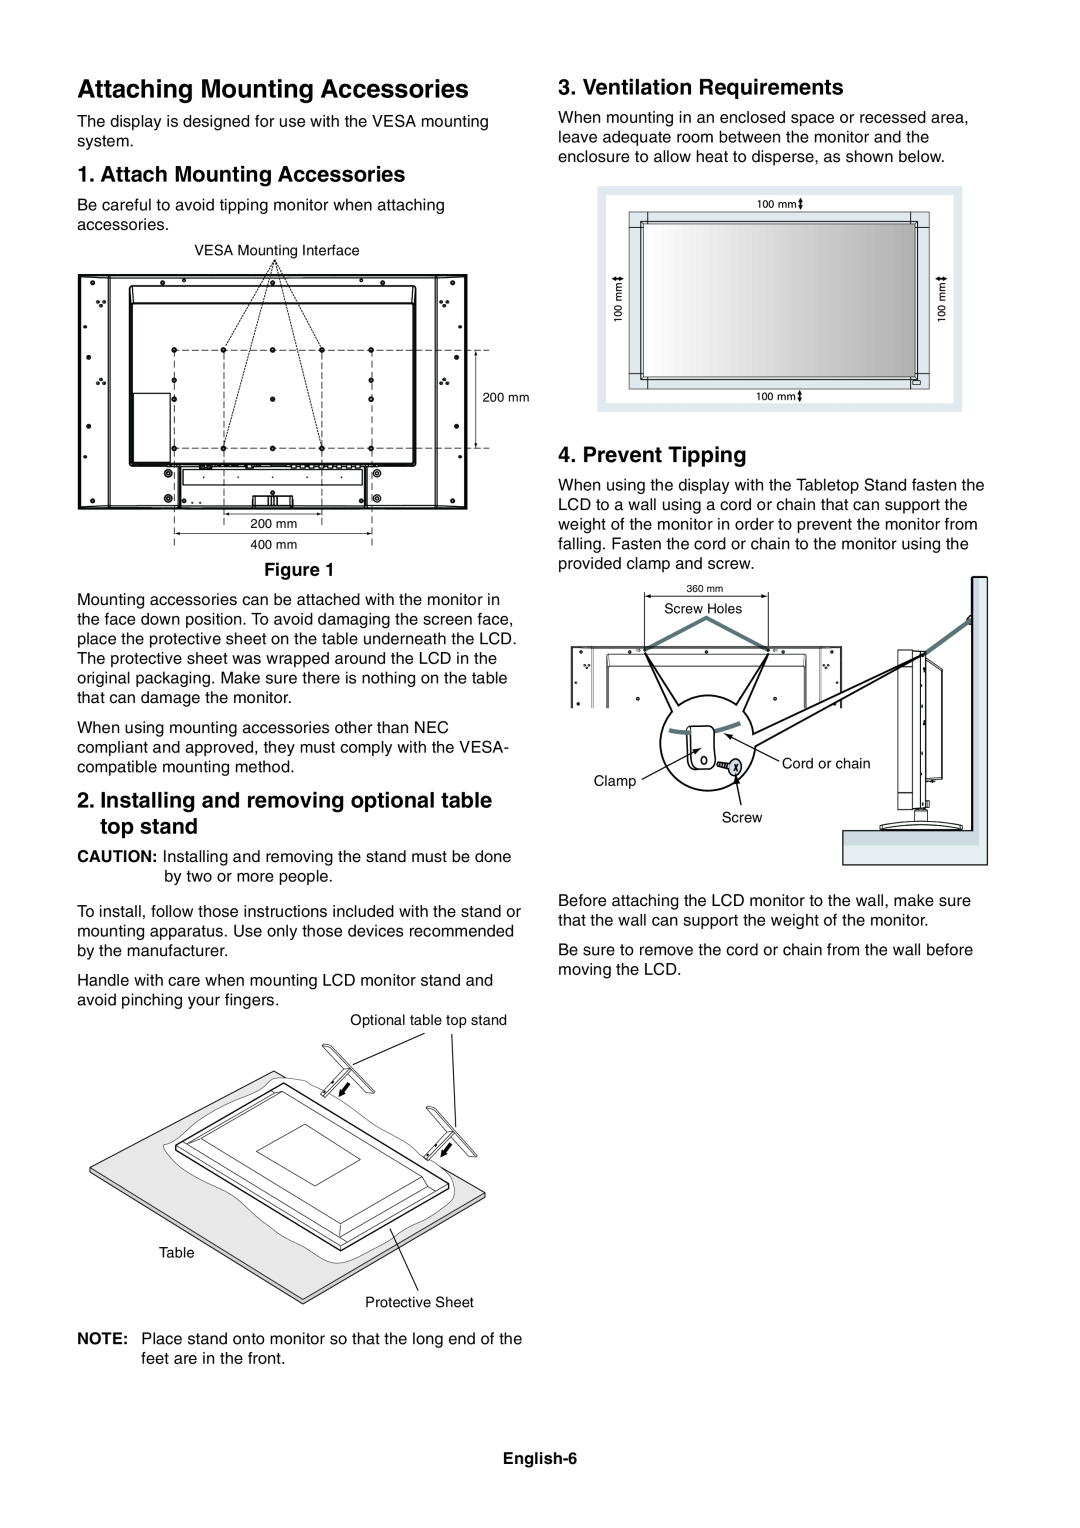 NEC LCD3215 Attaching Mounting Accessories, Attach Mounting Accessories, Installing and removing optional table top stand 